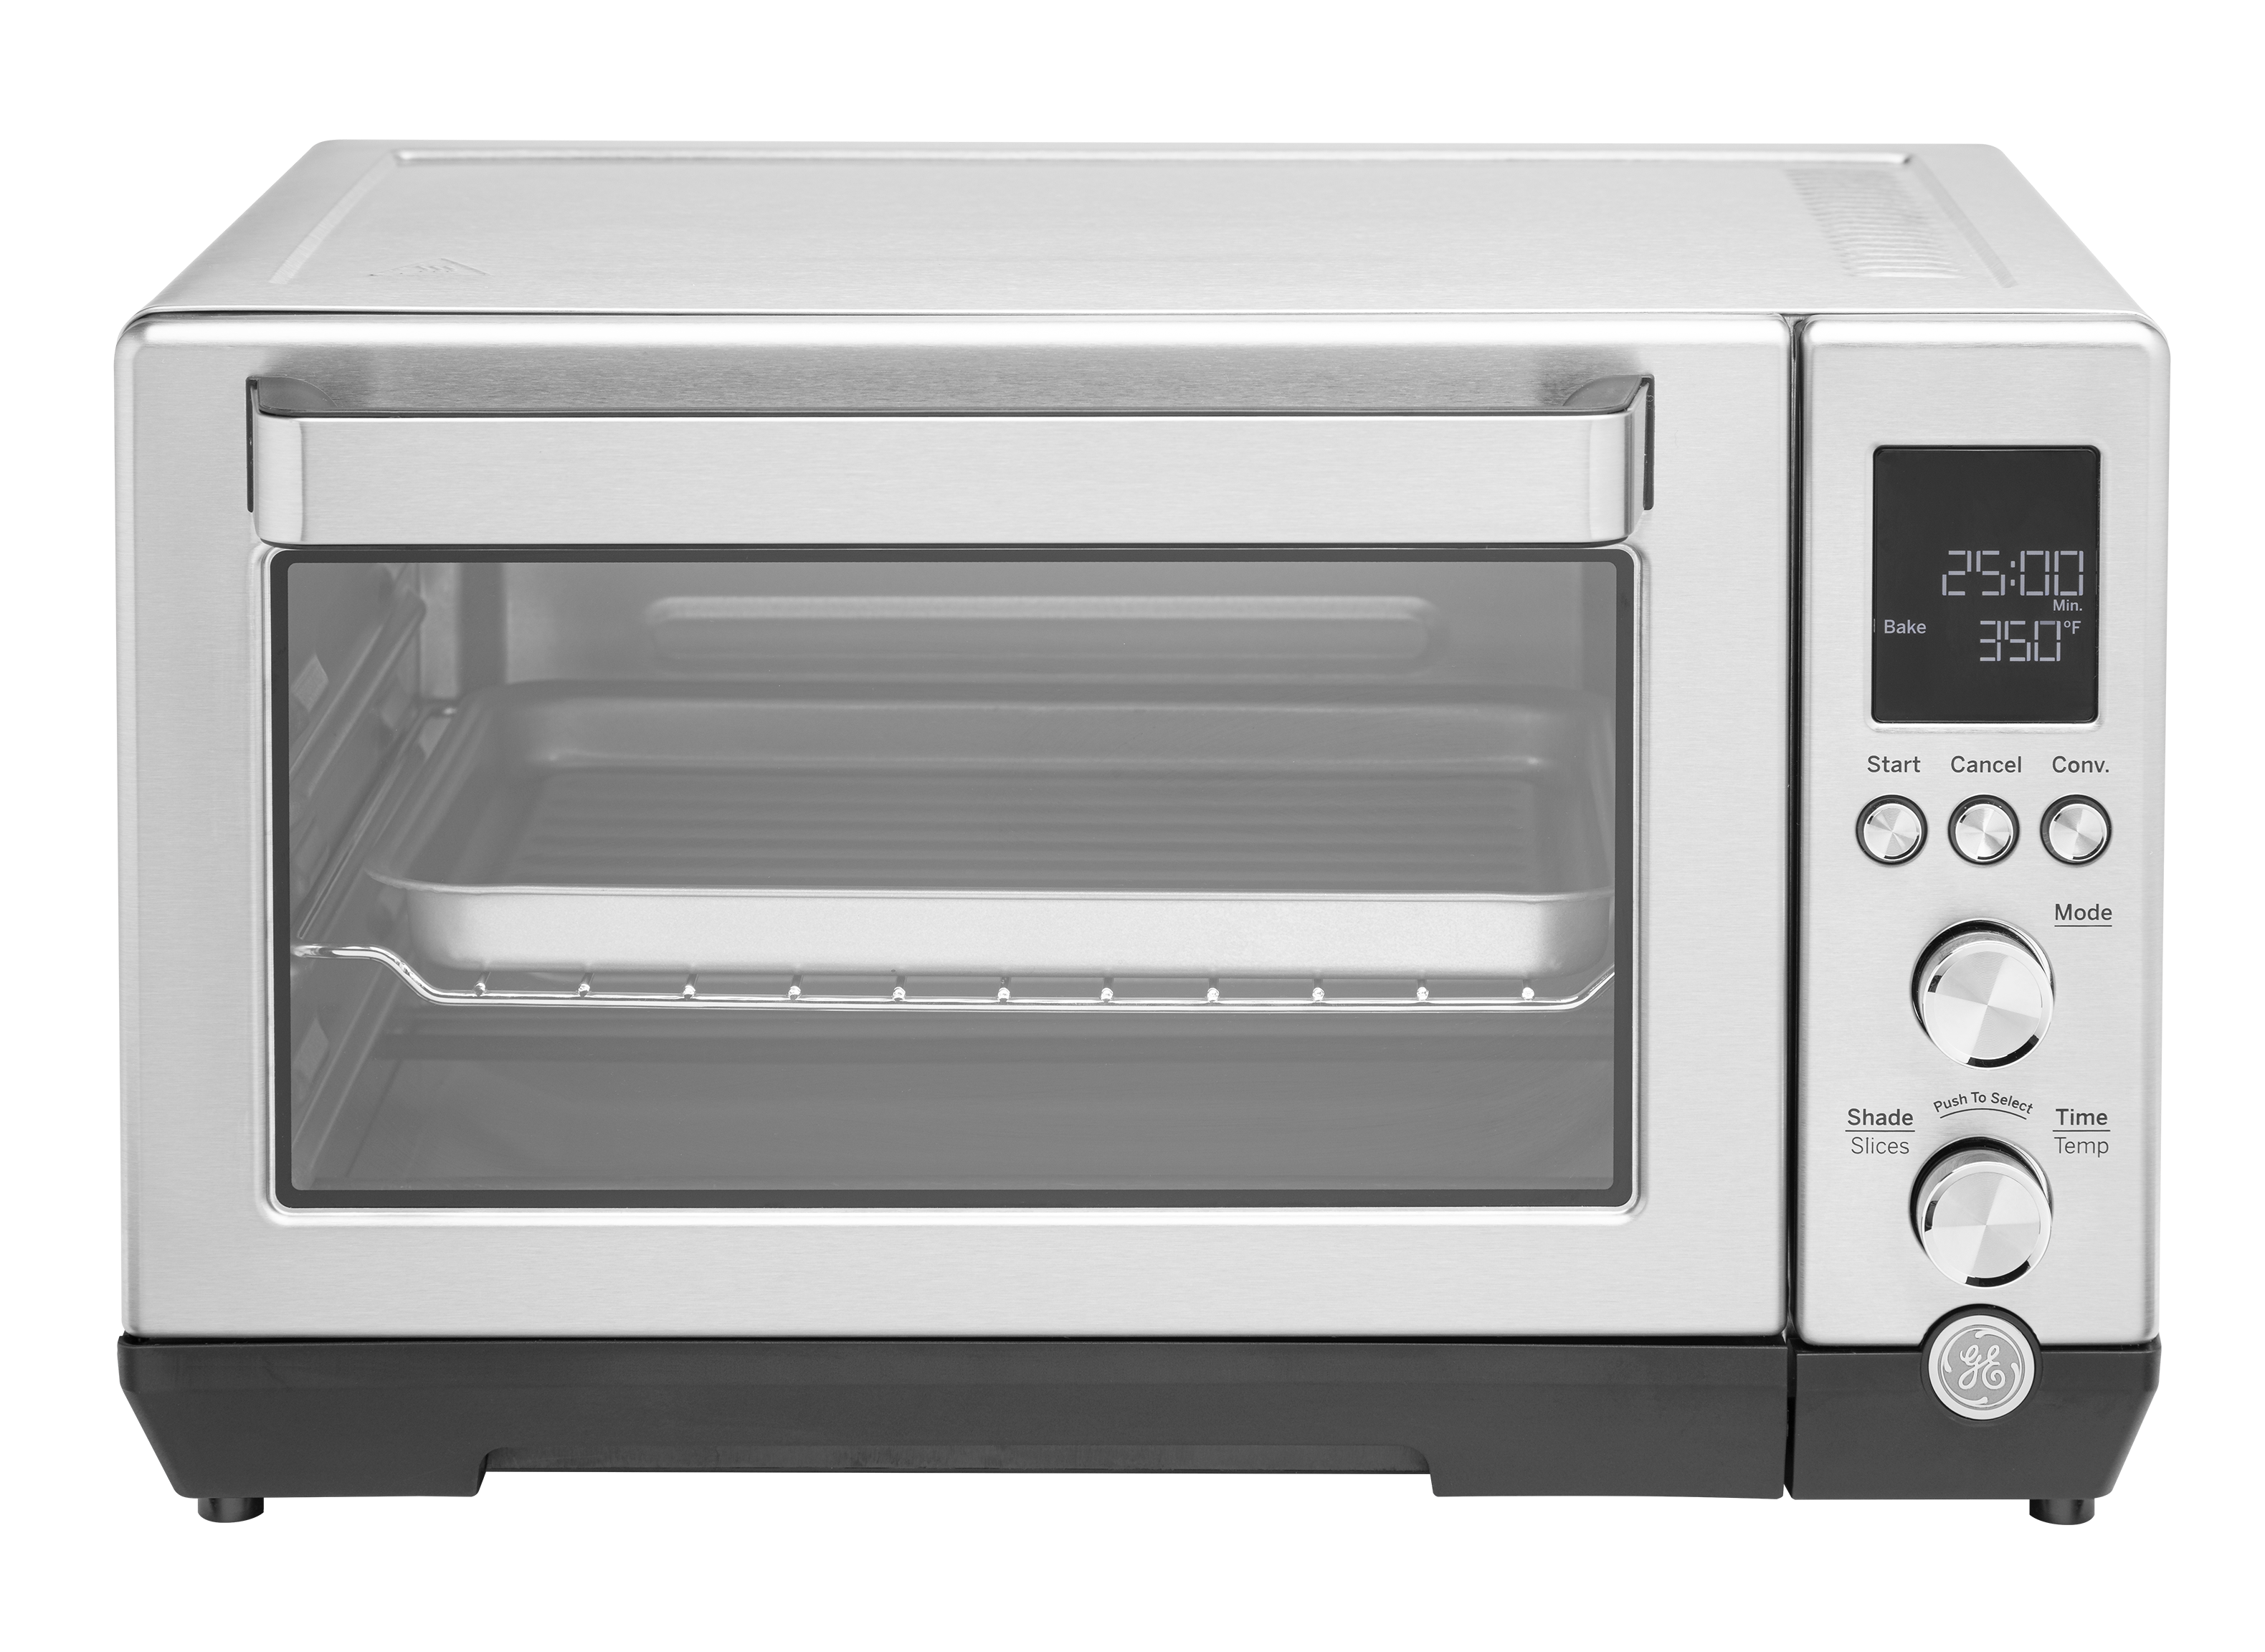 https://crdms.images.consumerreports.org/prod/products/cr/models/403035-toaster-ovens-ge-quartz-g9ocabsspss-10017878.png